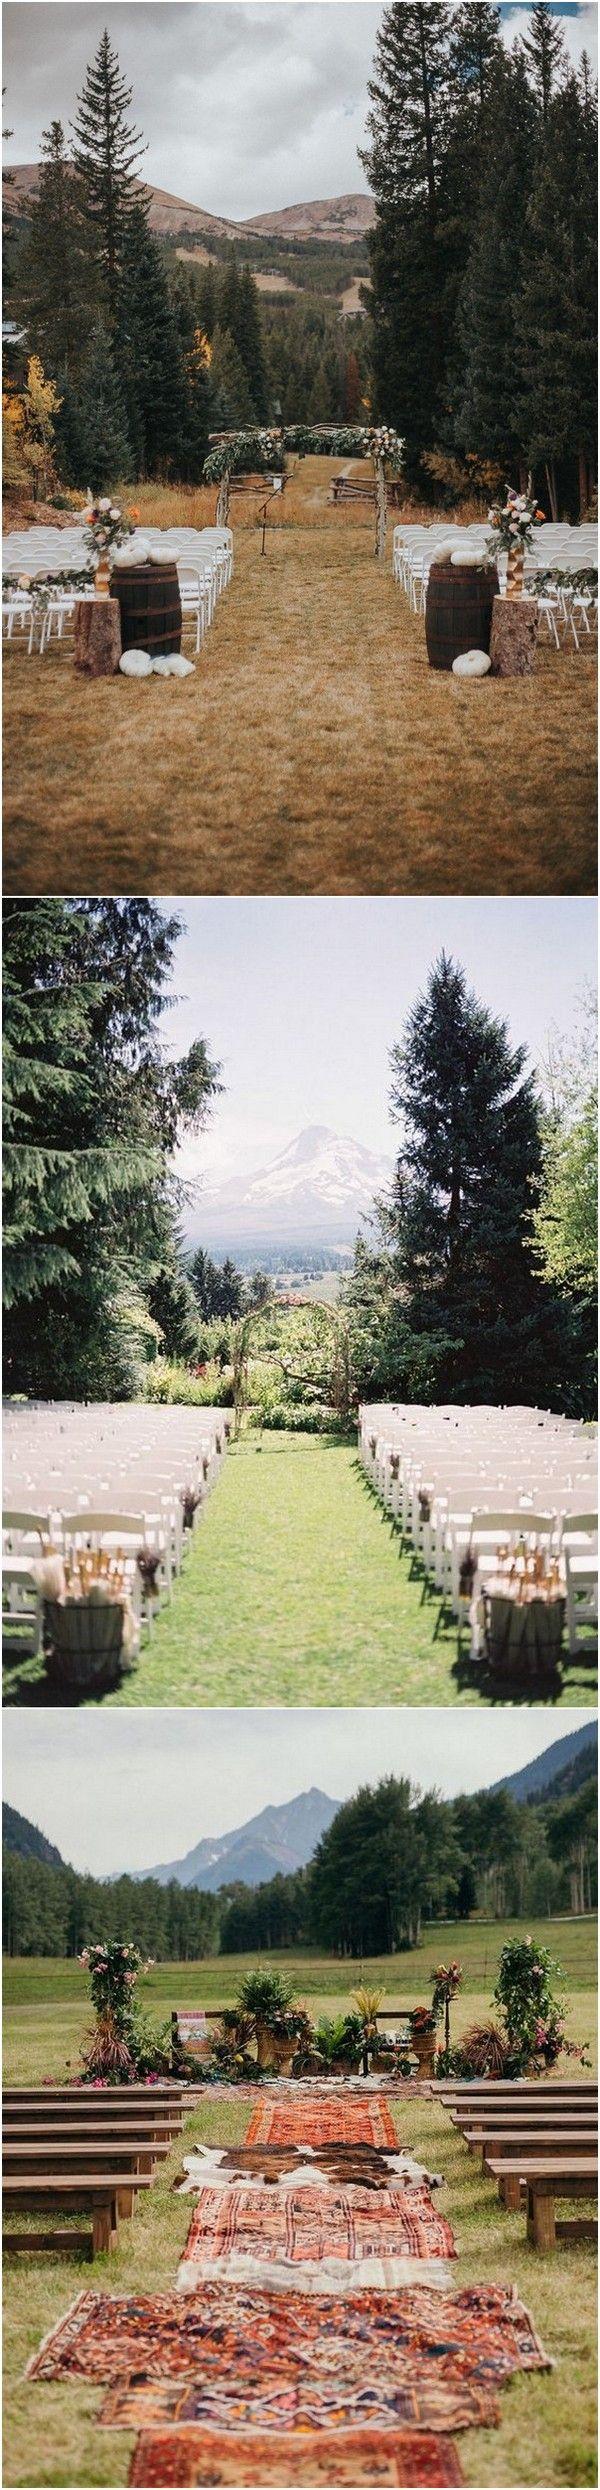 Wedding - 20 Brilliant Ideas To Have A Mountain Wedding - Page 2 Of 2